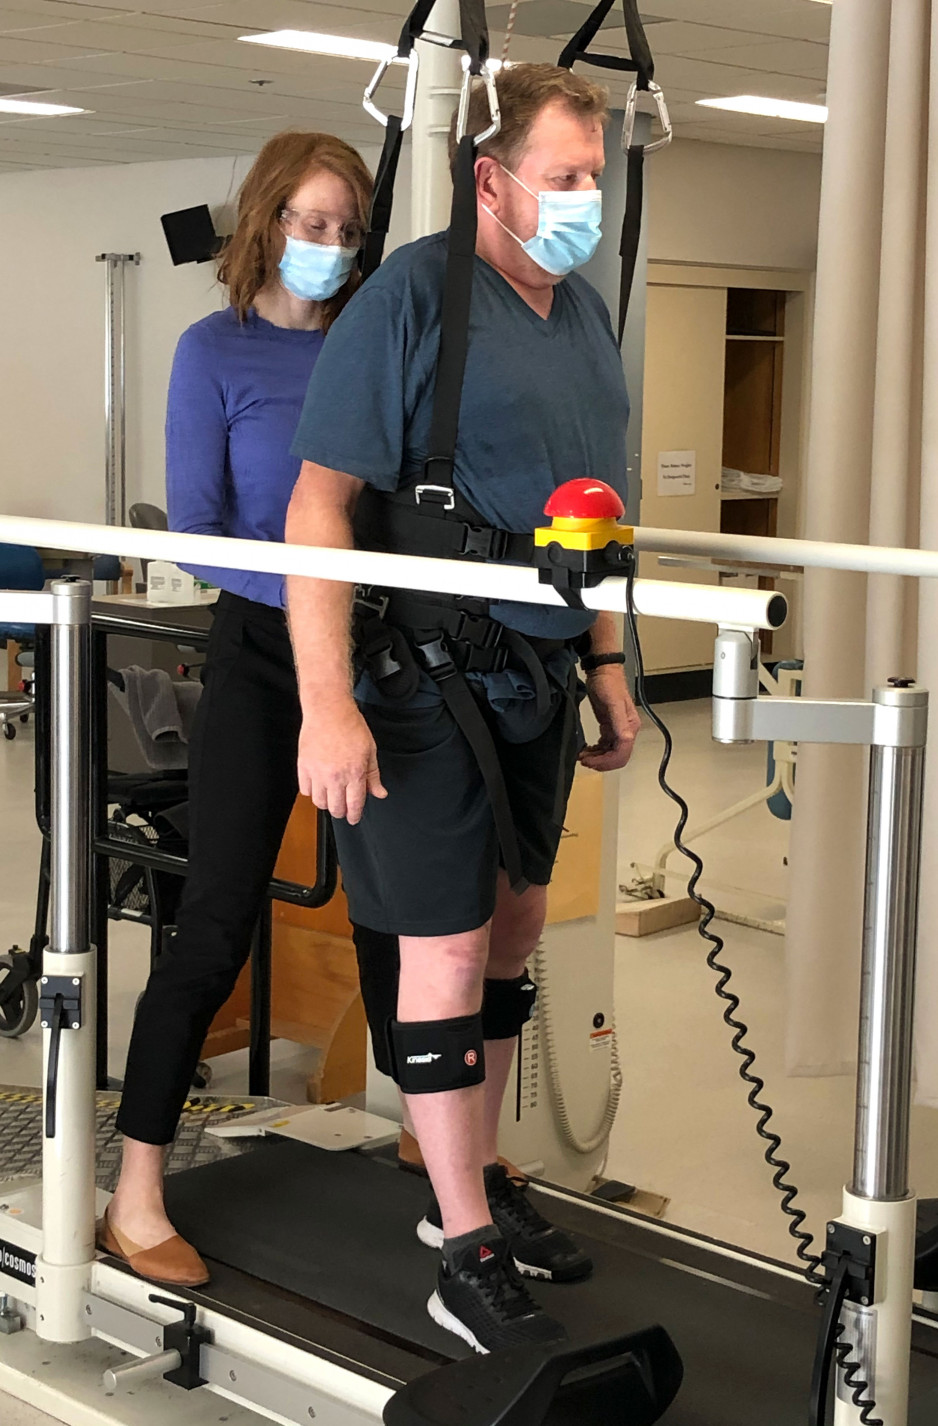 Paul Garrett suspended by a harness over a treadmill with a physiotherapist supporting him from behind